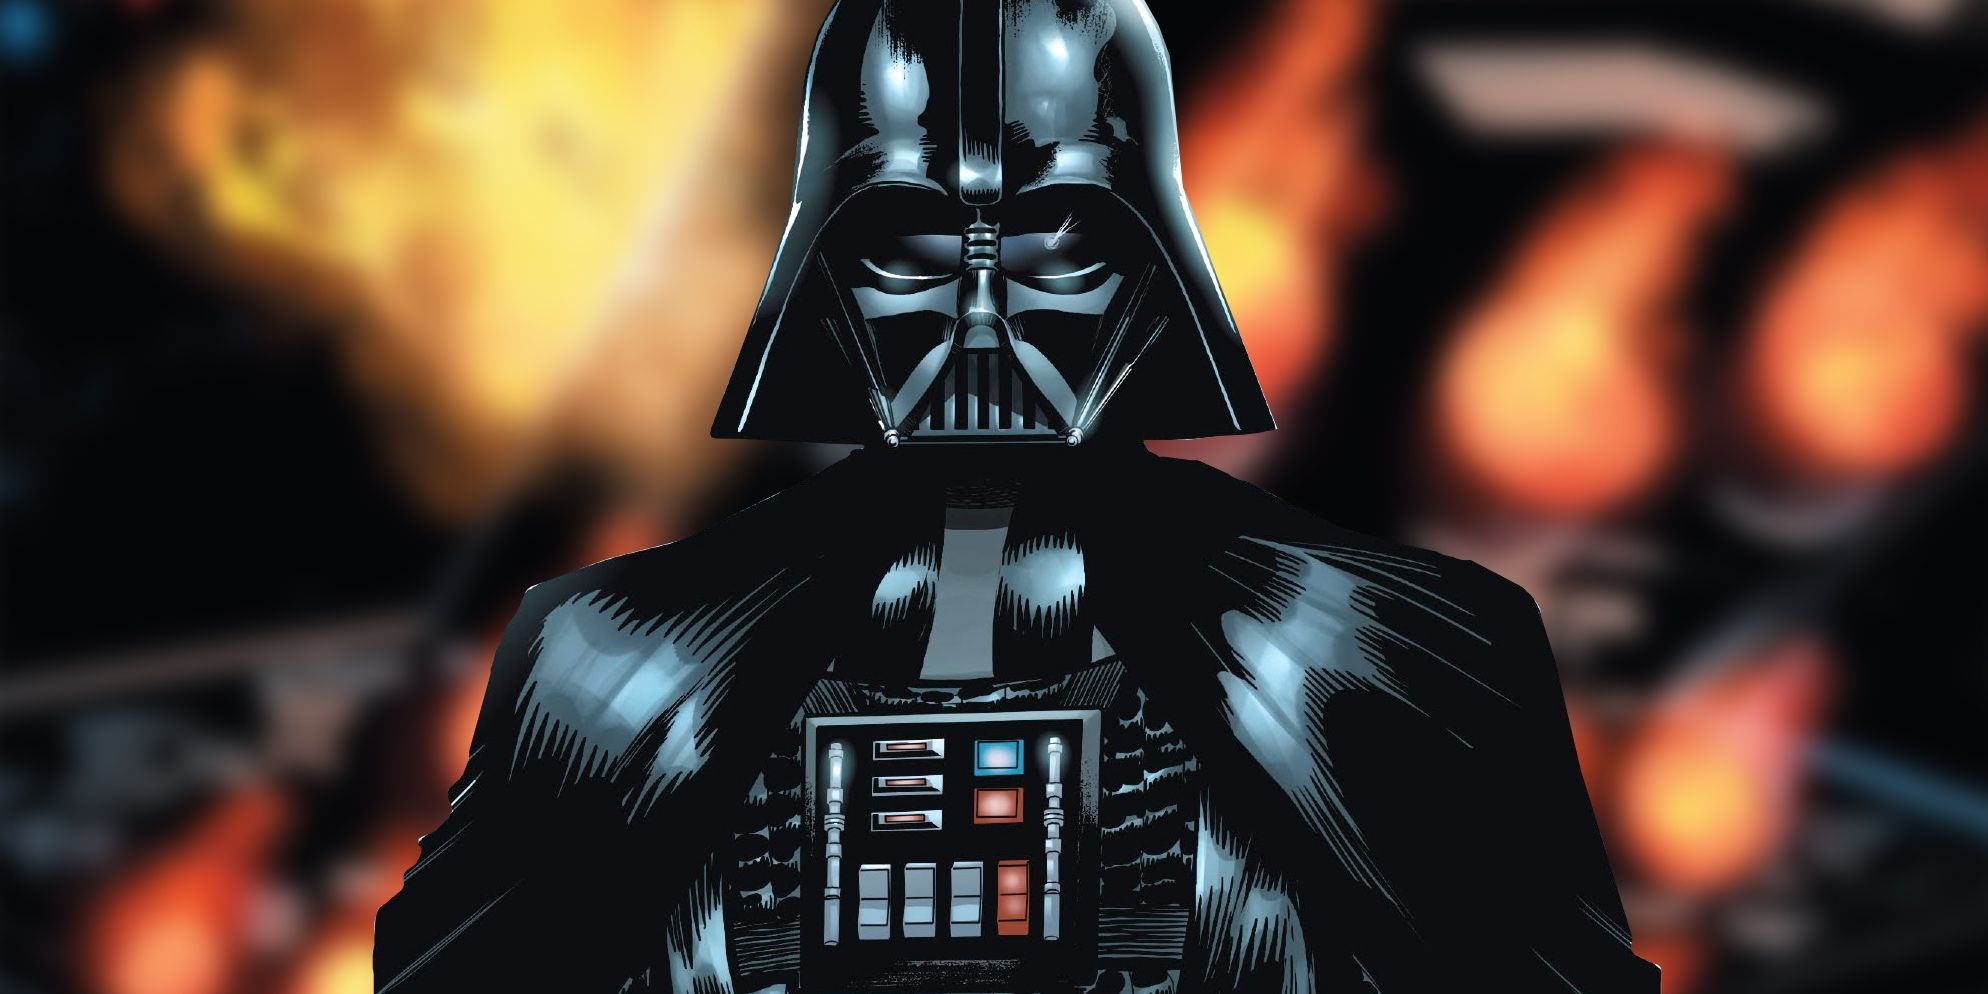 Vader-Explosion-Survived-Featured